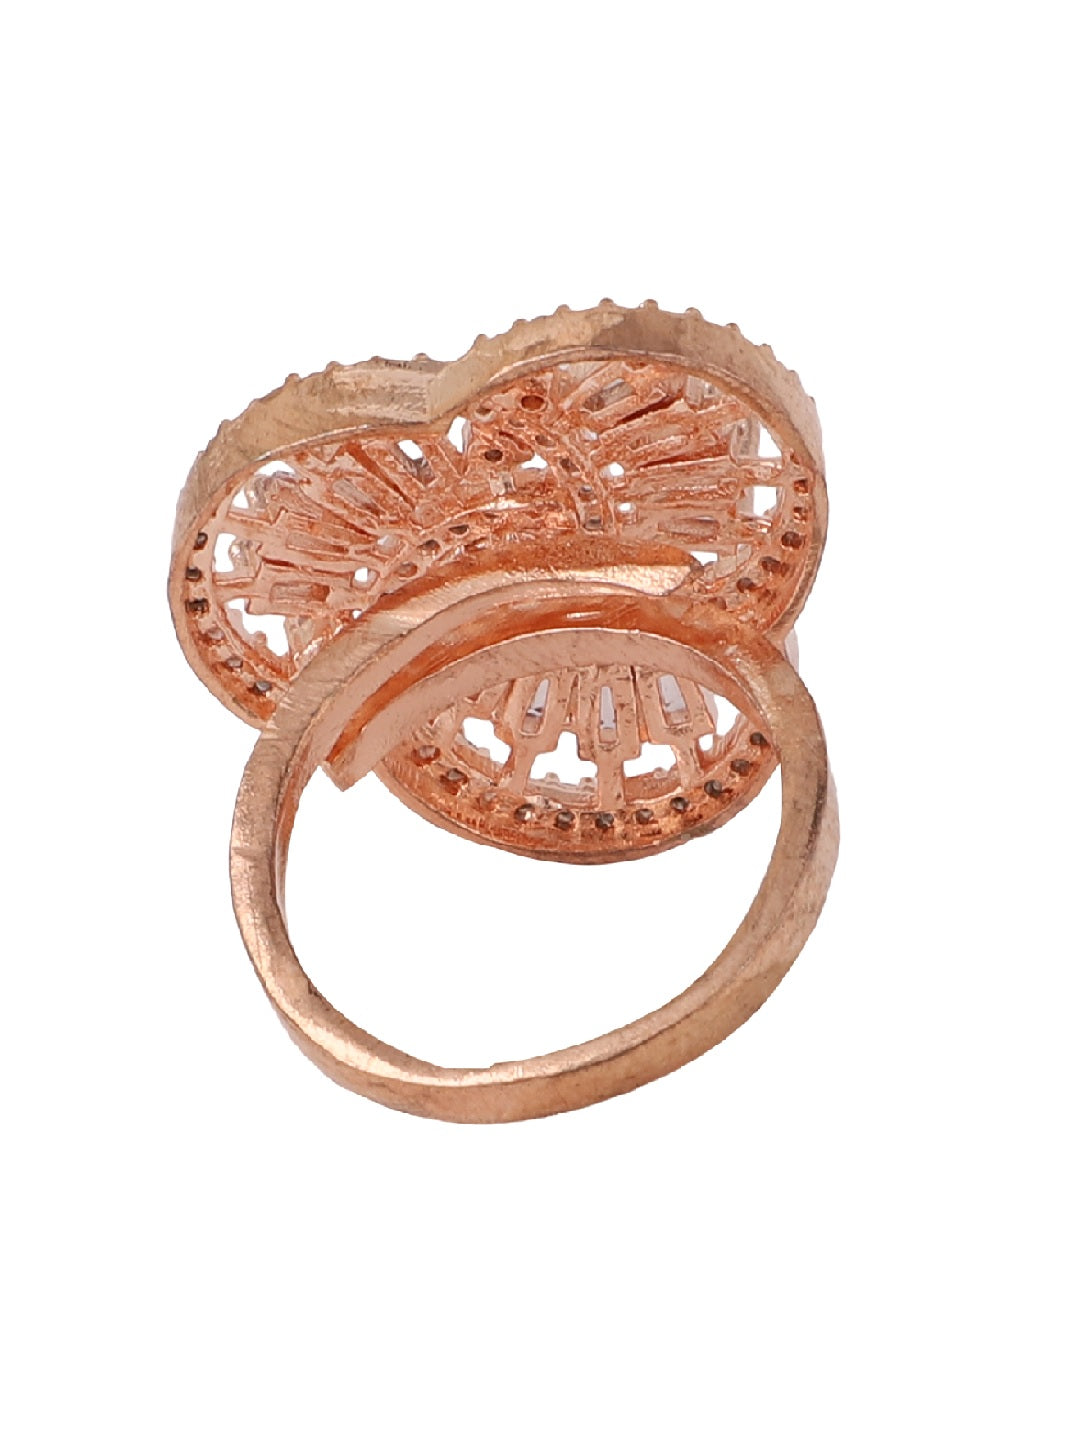 Women's Rose Gold-Plated Ad Studded Circular Hand Crafted Adjustable Finger Ring - Anikas Creation